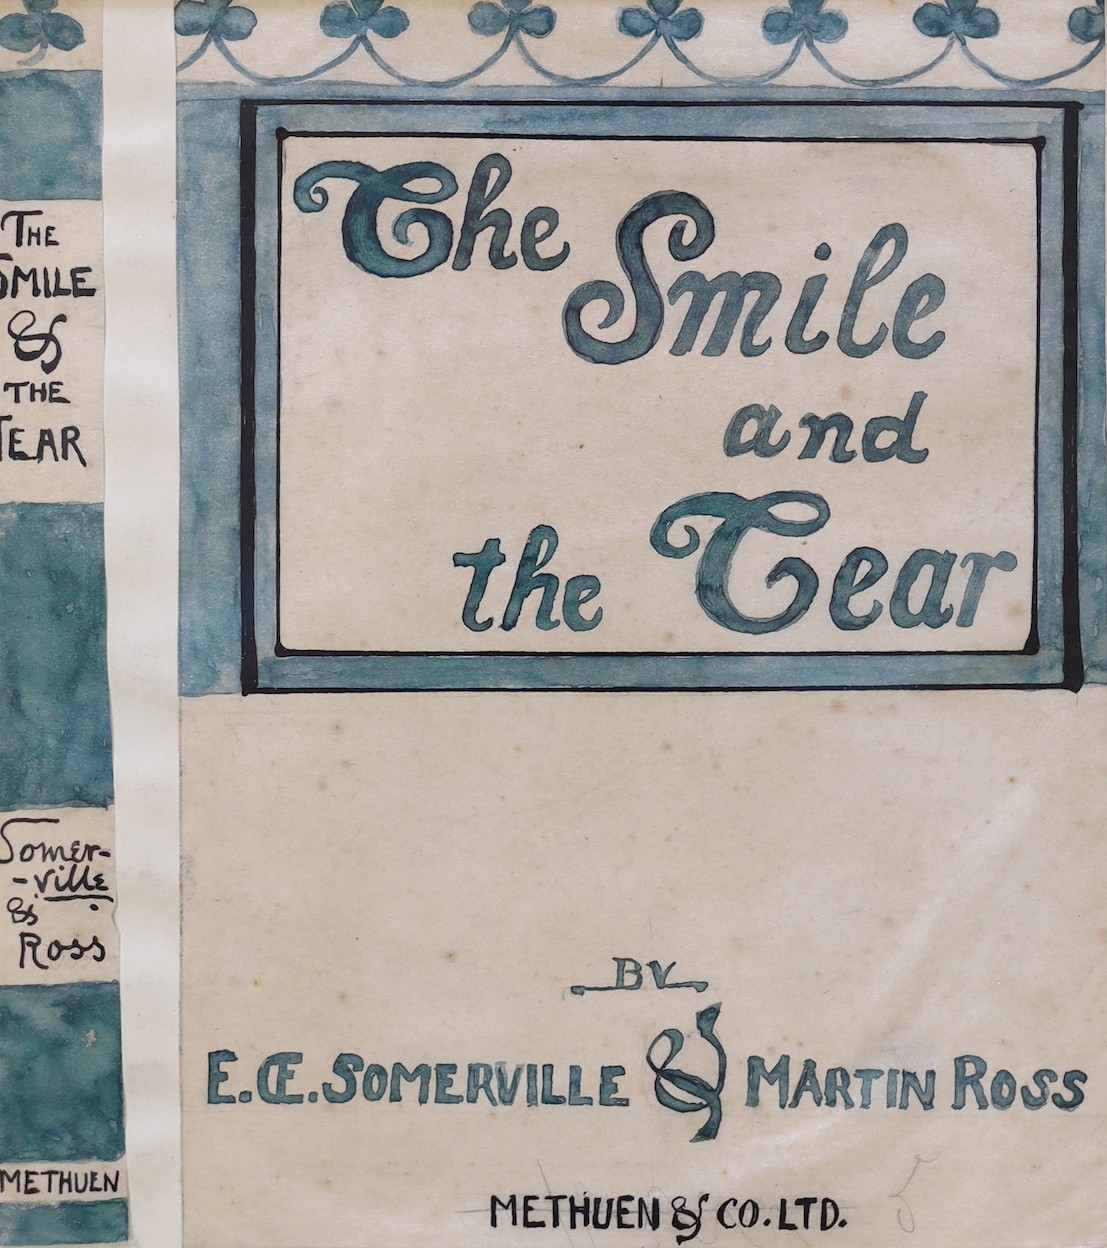 Edith Oenone Somerville (1858-1949), two ink and watercolor designs for book jackets, The Smile and The Tear & An Enthusiast, signed and inscribed, 24 x 17cm and 21 x 19cm